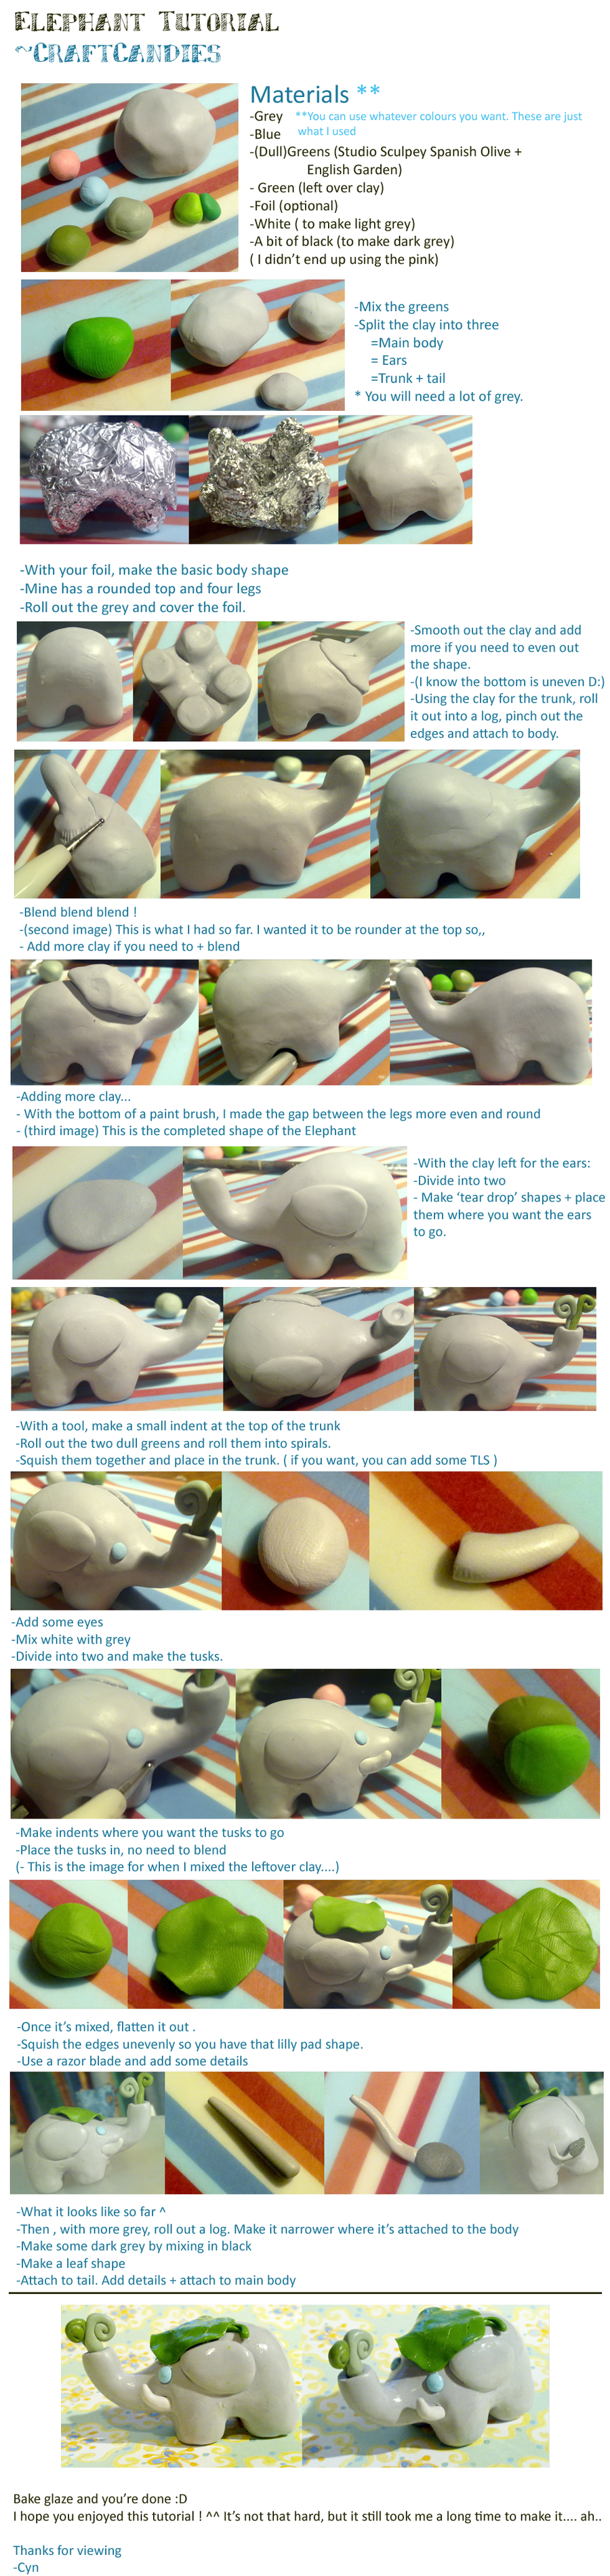 polymer_clay___elephant_tutorial_by_craftcandies-d5cp6p7.png